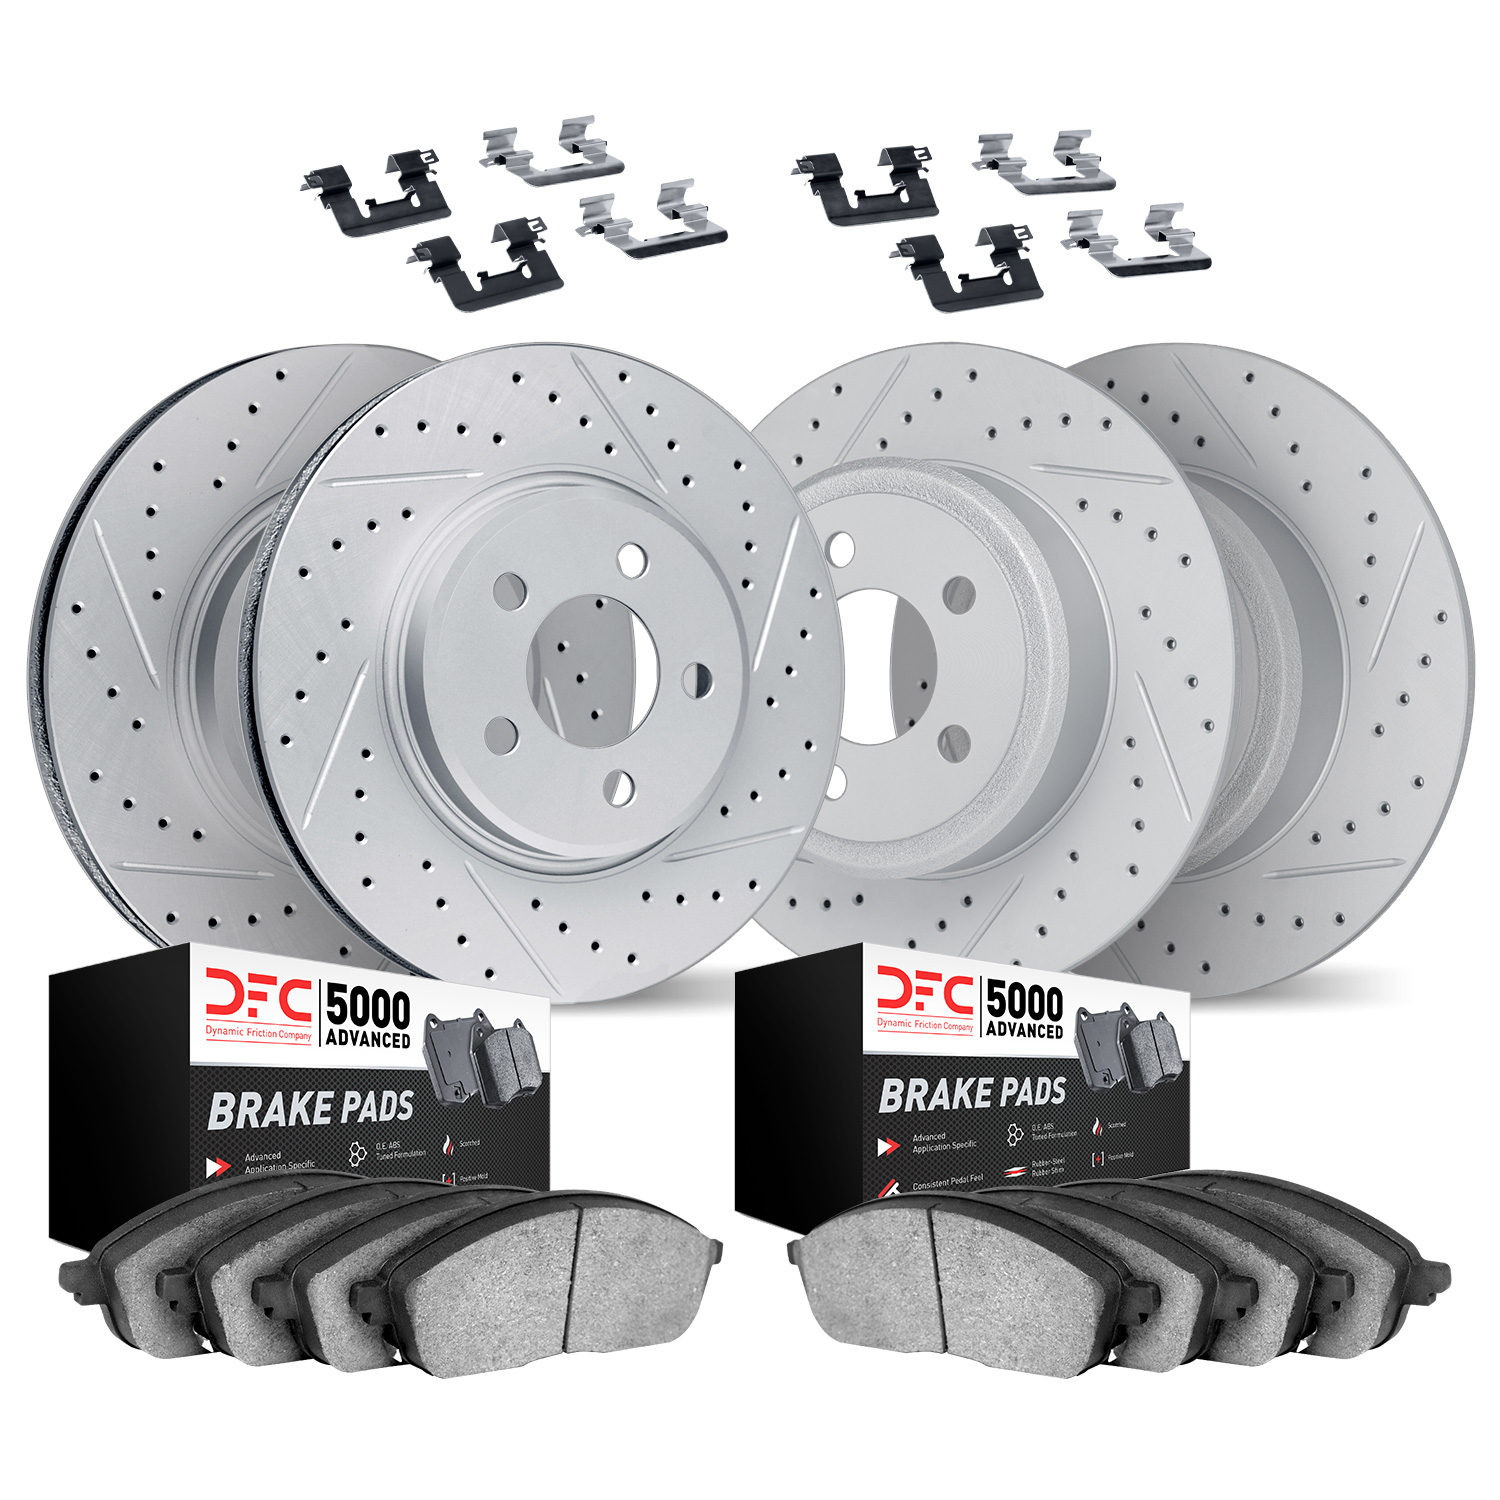 2514-59070 Geoperformance Drilled/Slotted Rotors w/5000 Advanced Brake Pads Kit & Hardware, 2006-2014 Acura/Honda, Position: Fro